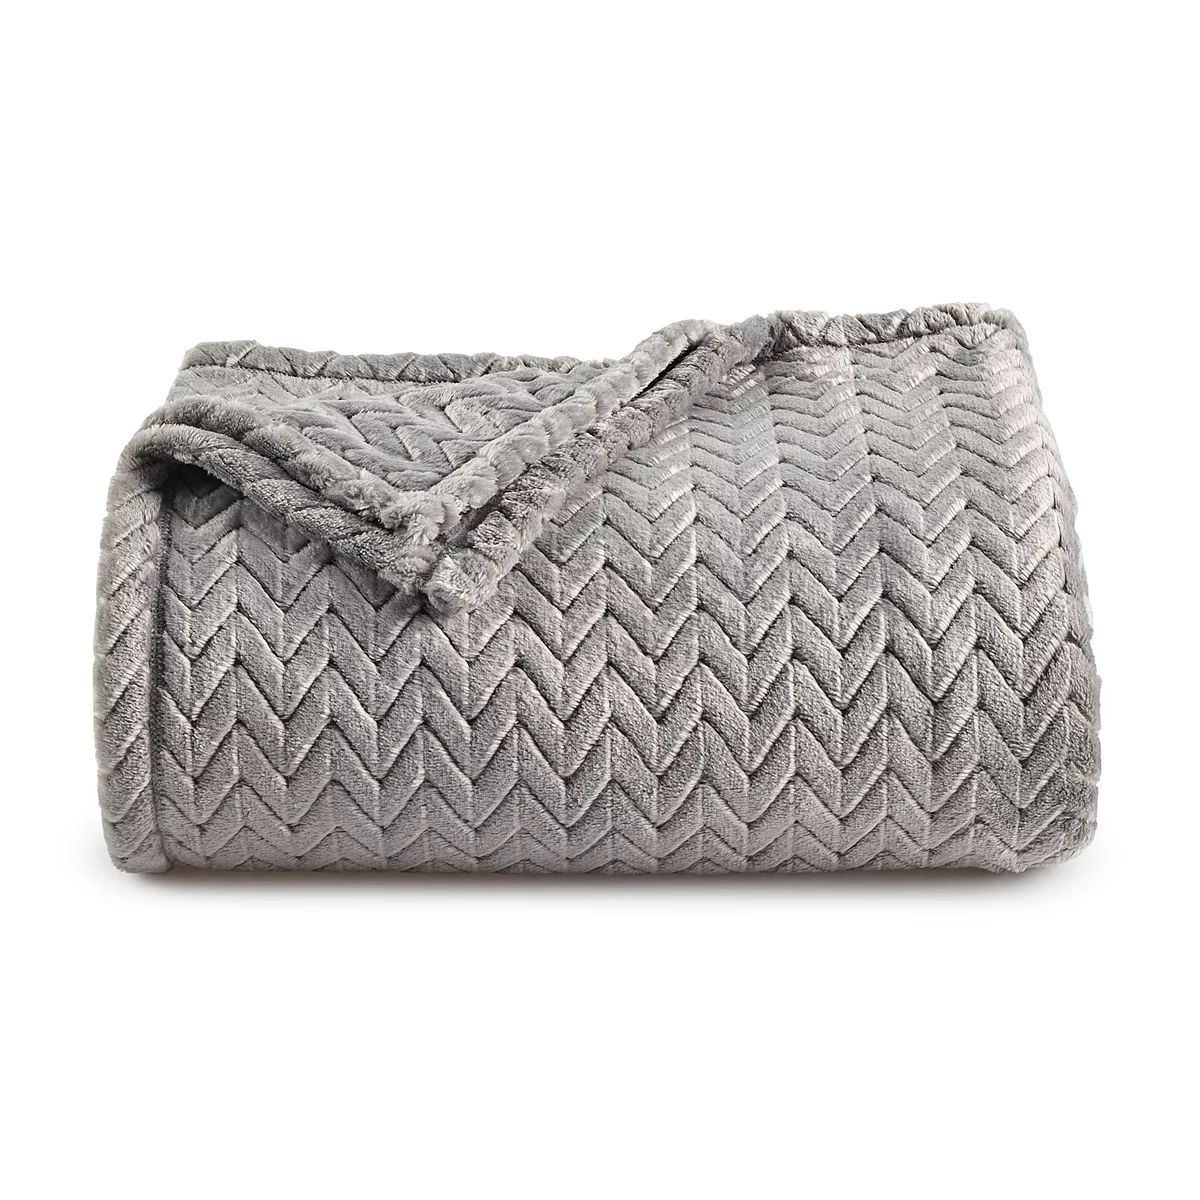 The Big One® Oversized Supersoft Plush Throw | Kohl's